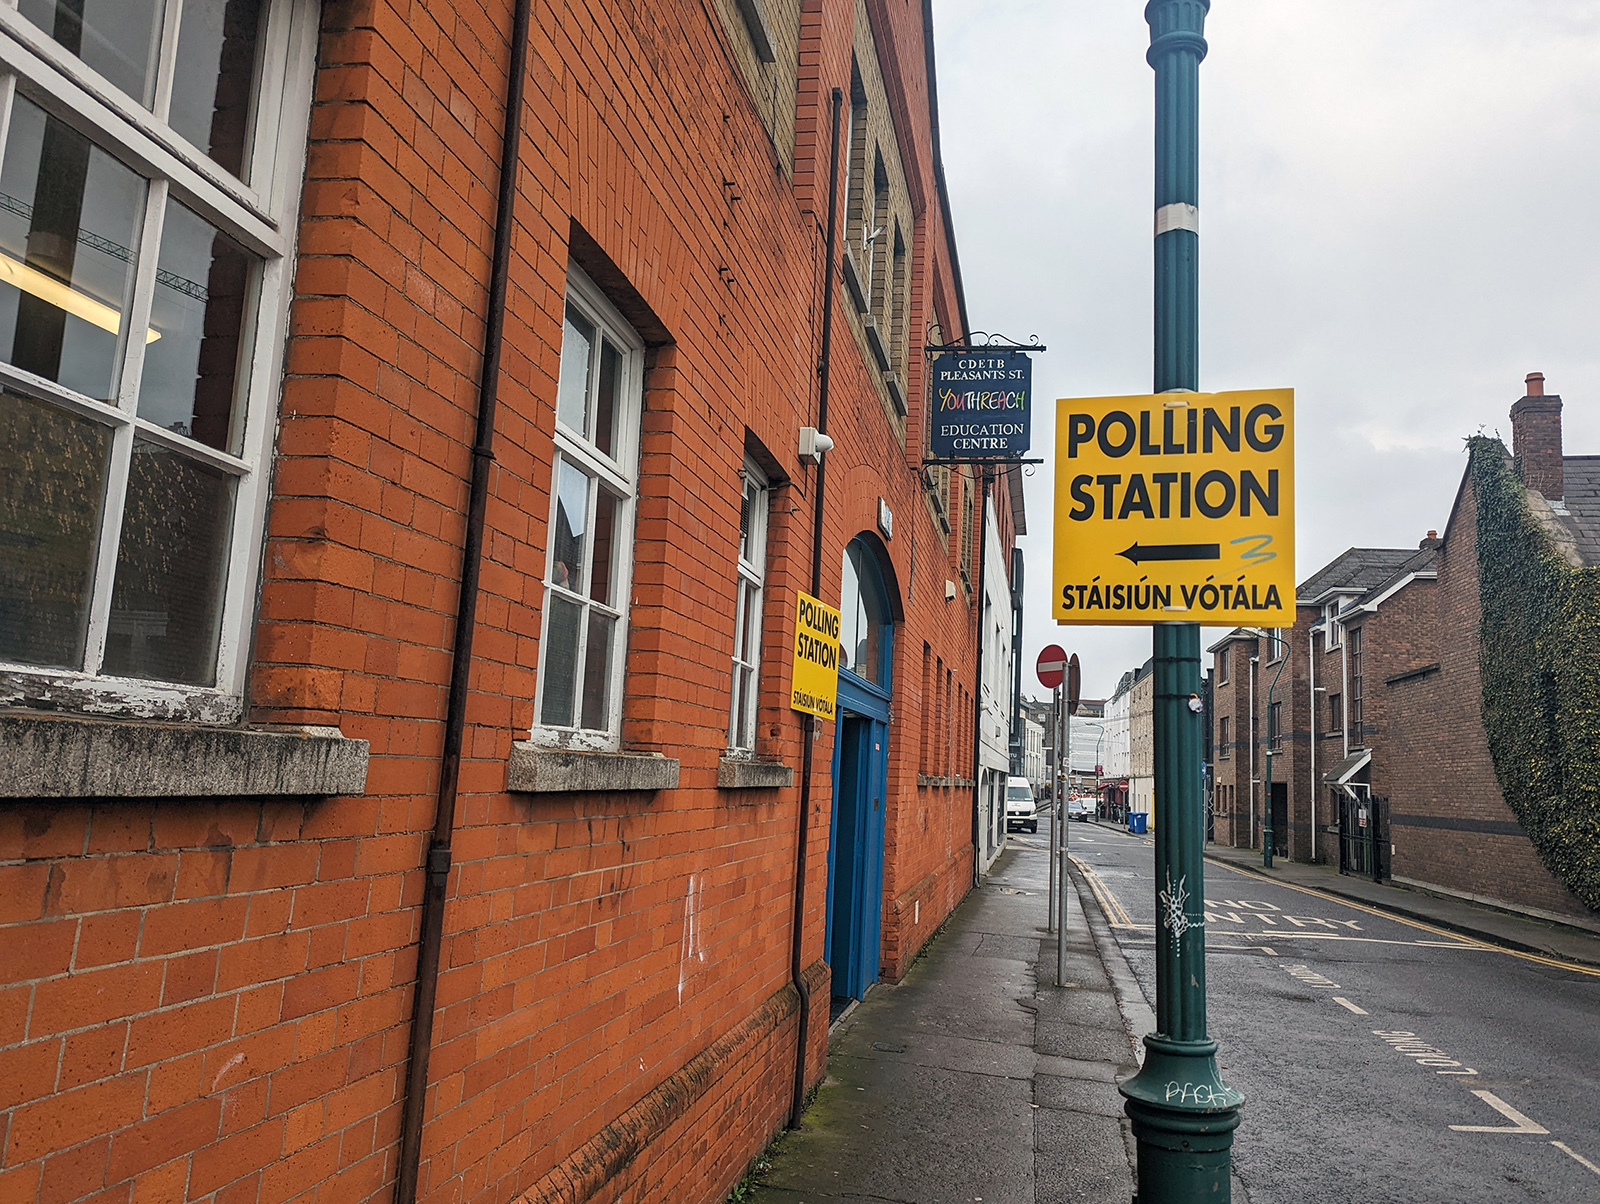 Sign for a voting location in Dublin, Ireland. (Photo by Daniel O'Connor)